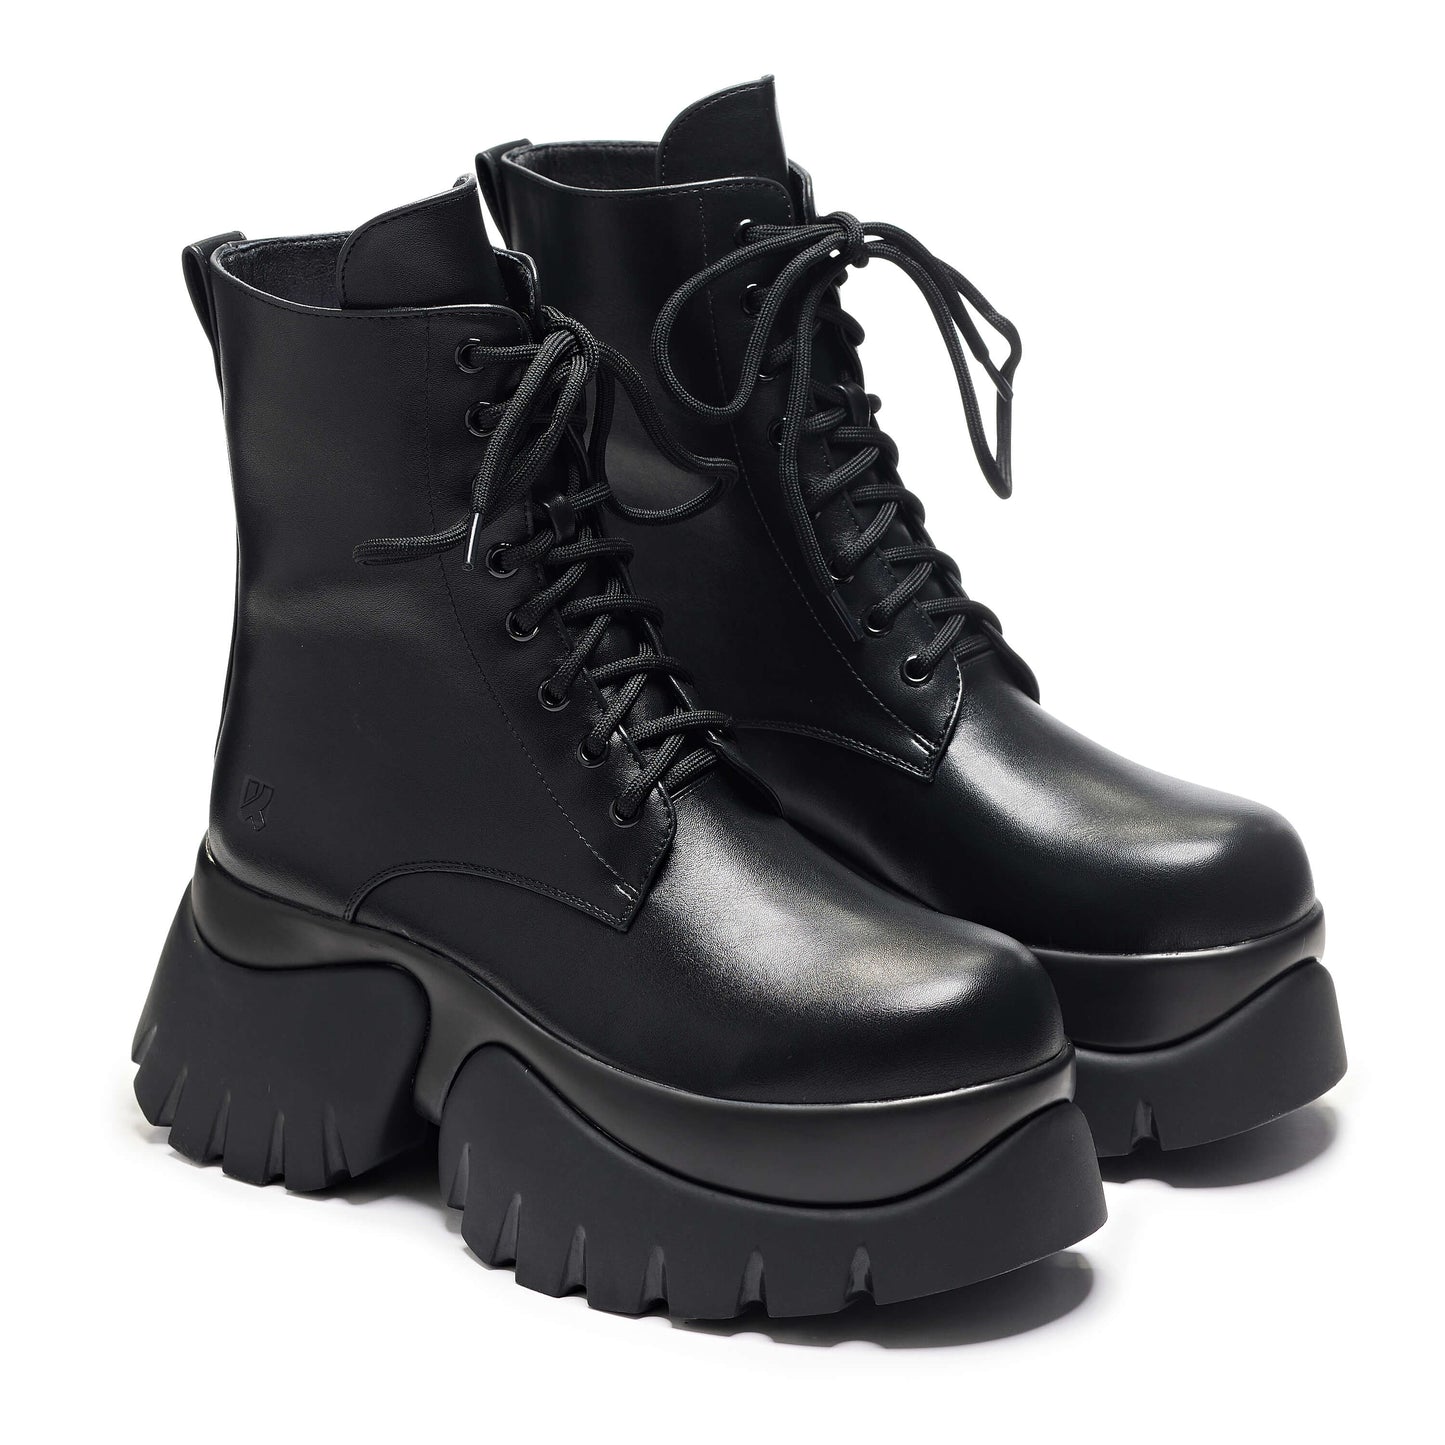 Rancor Vilun Black Lace up Boots - Ankle Boots - KOI Footwear - Black - Three-Quarter View